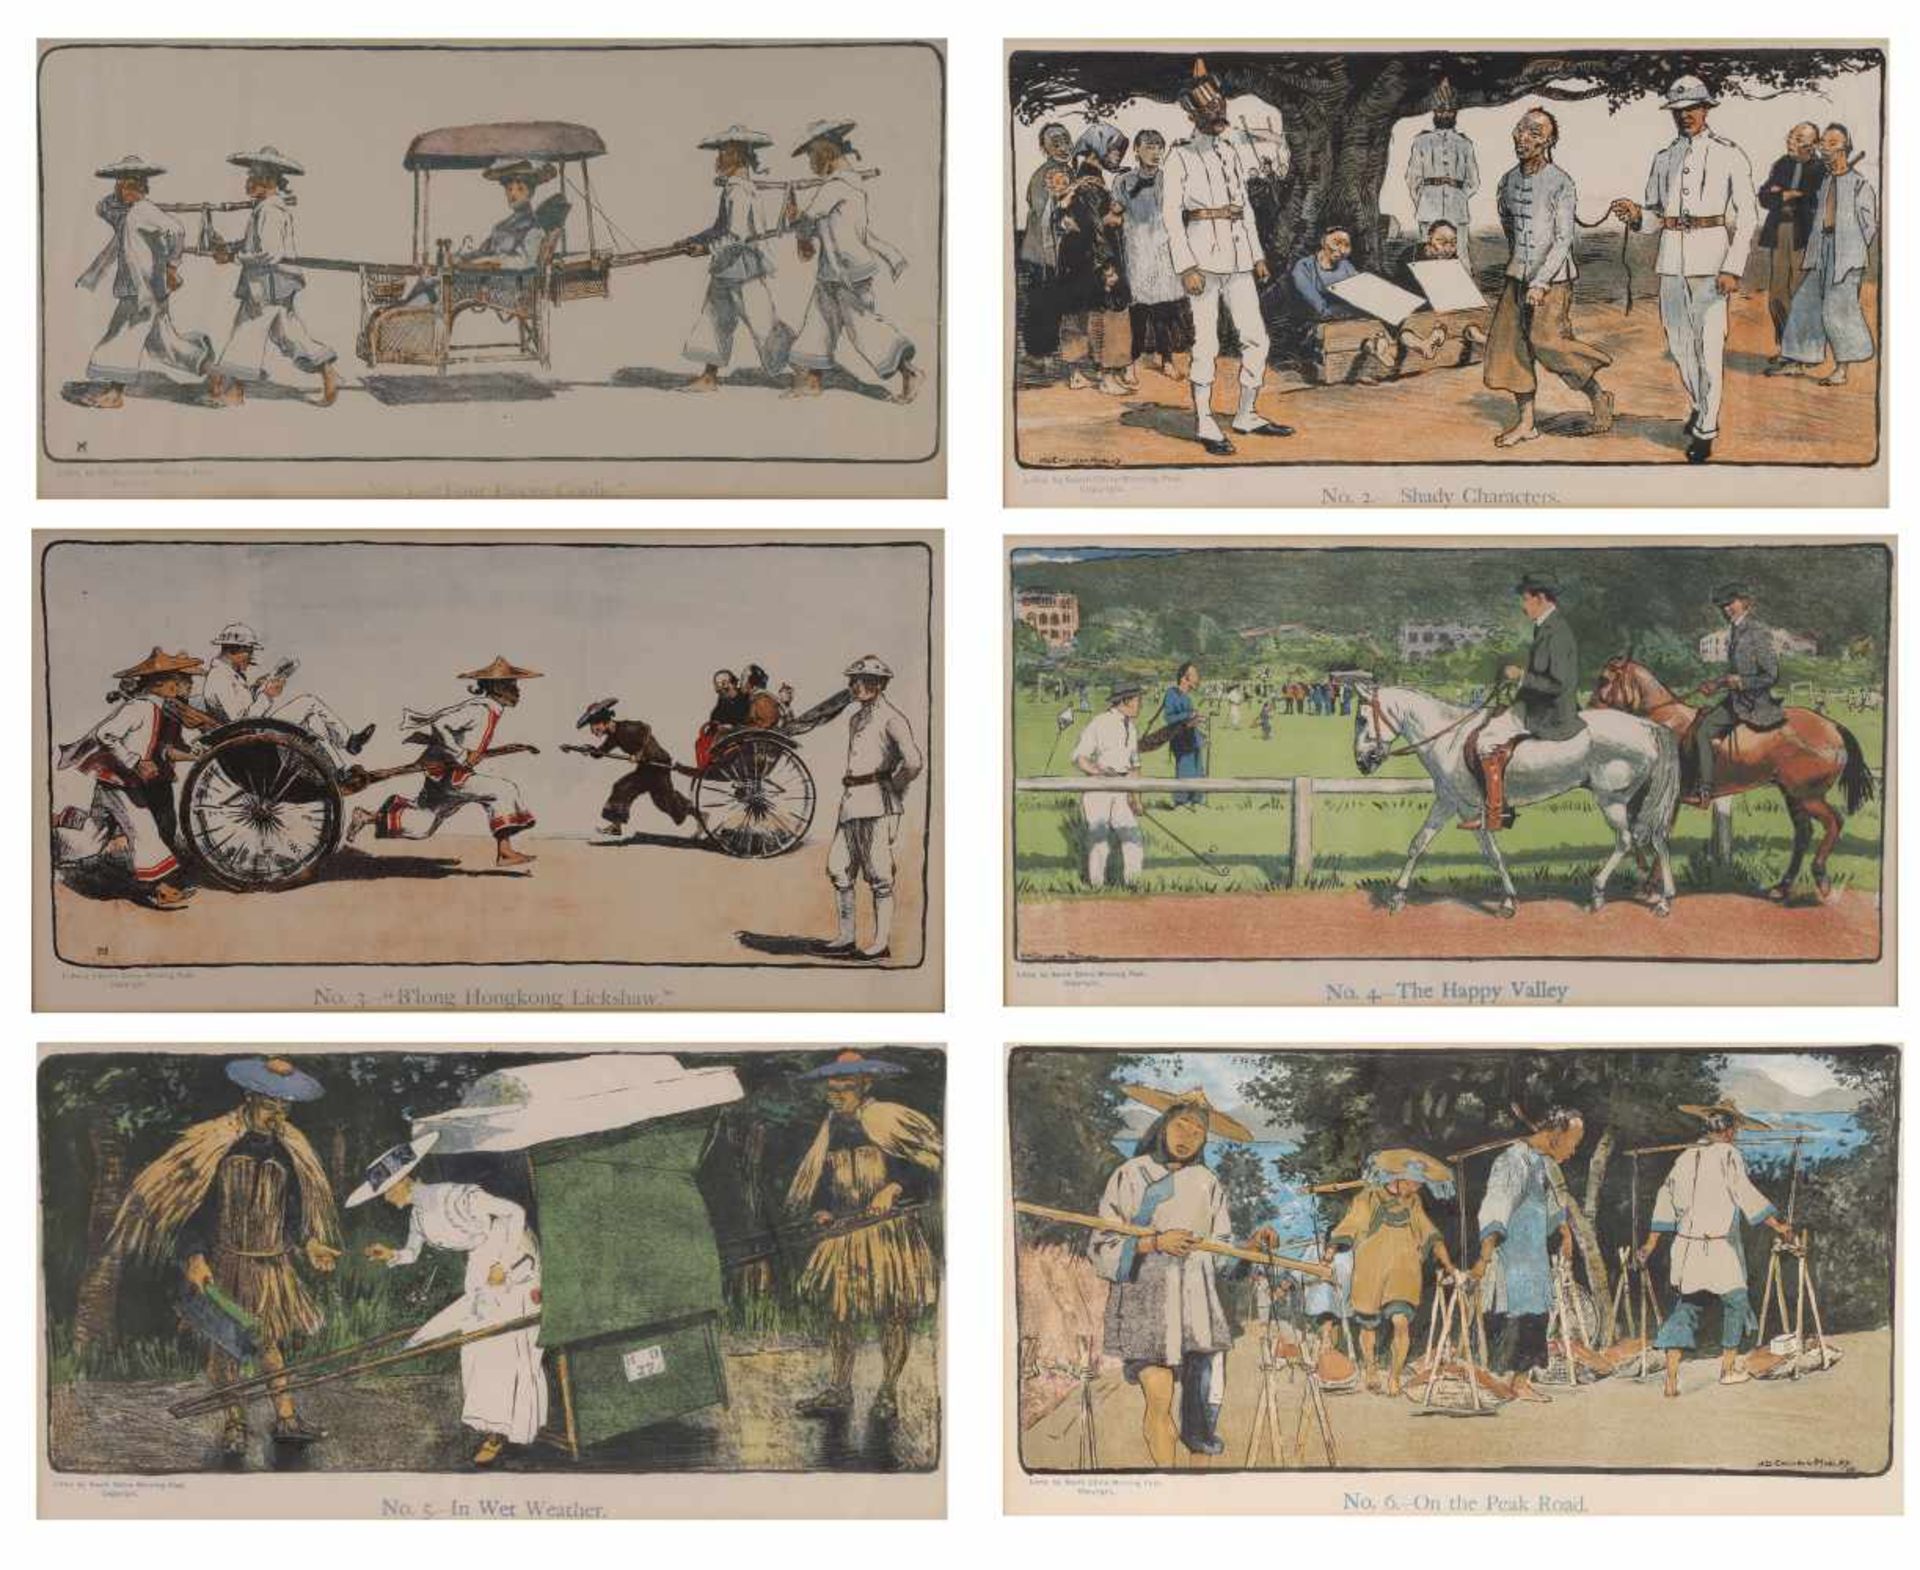 SIX LITHOGRAPHS FROM H.D. COLLISONS-MORLEY (BRIT. 1877-1915) DEPICTING SCENES OF HONG KONG